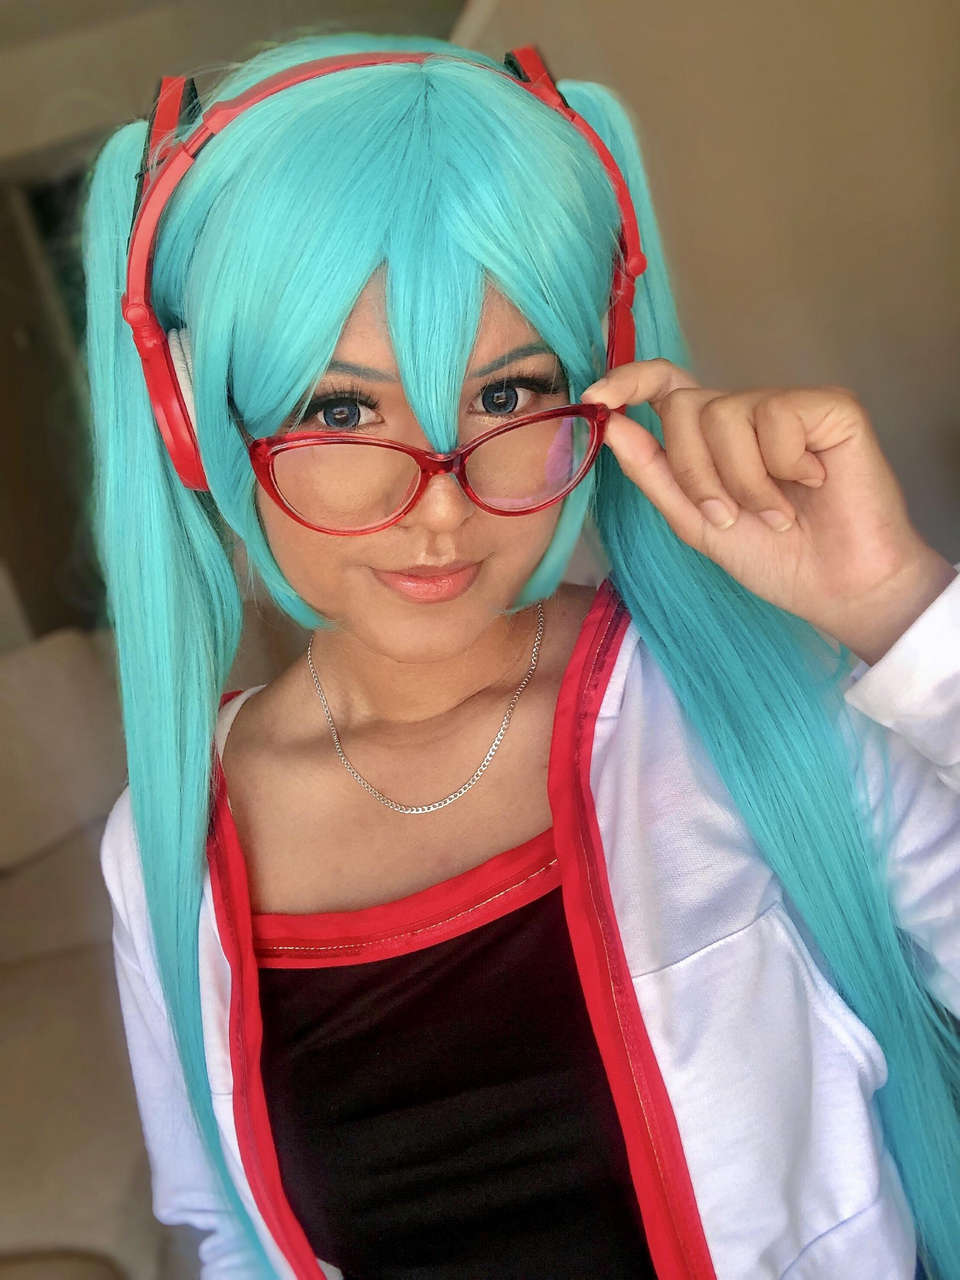 My Miku Natural Ver Cosplay Had This Ready For Miku Expo But That Has Been Postpone